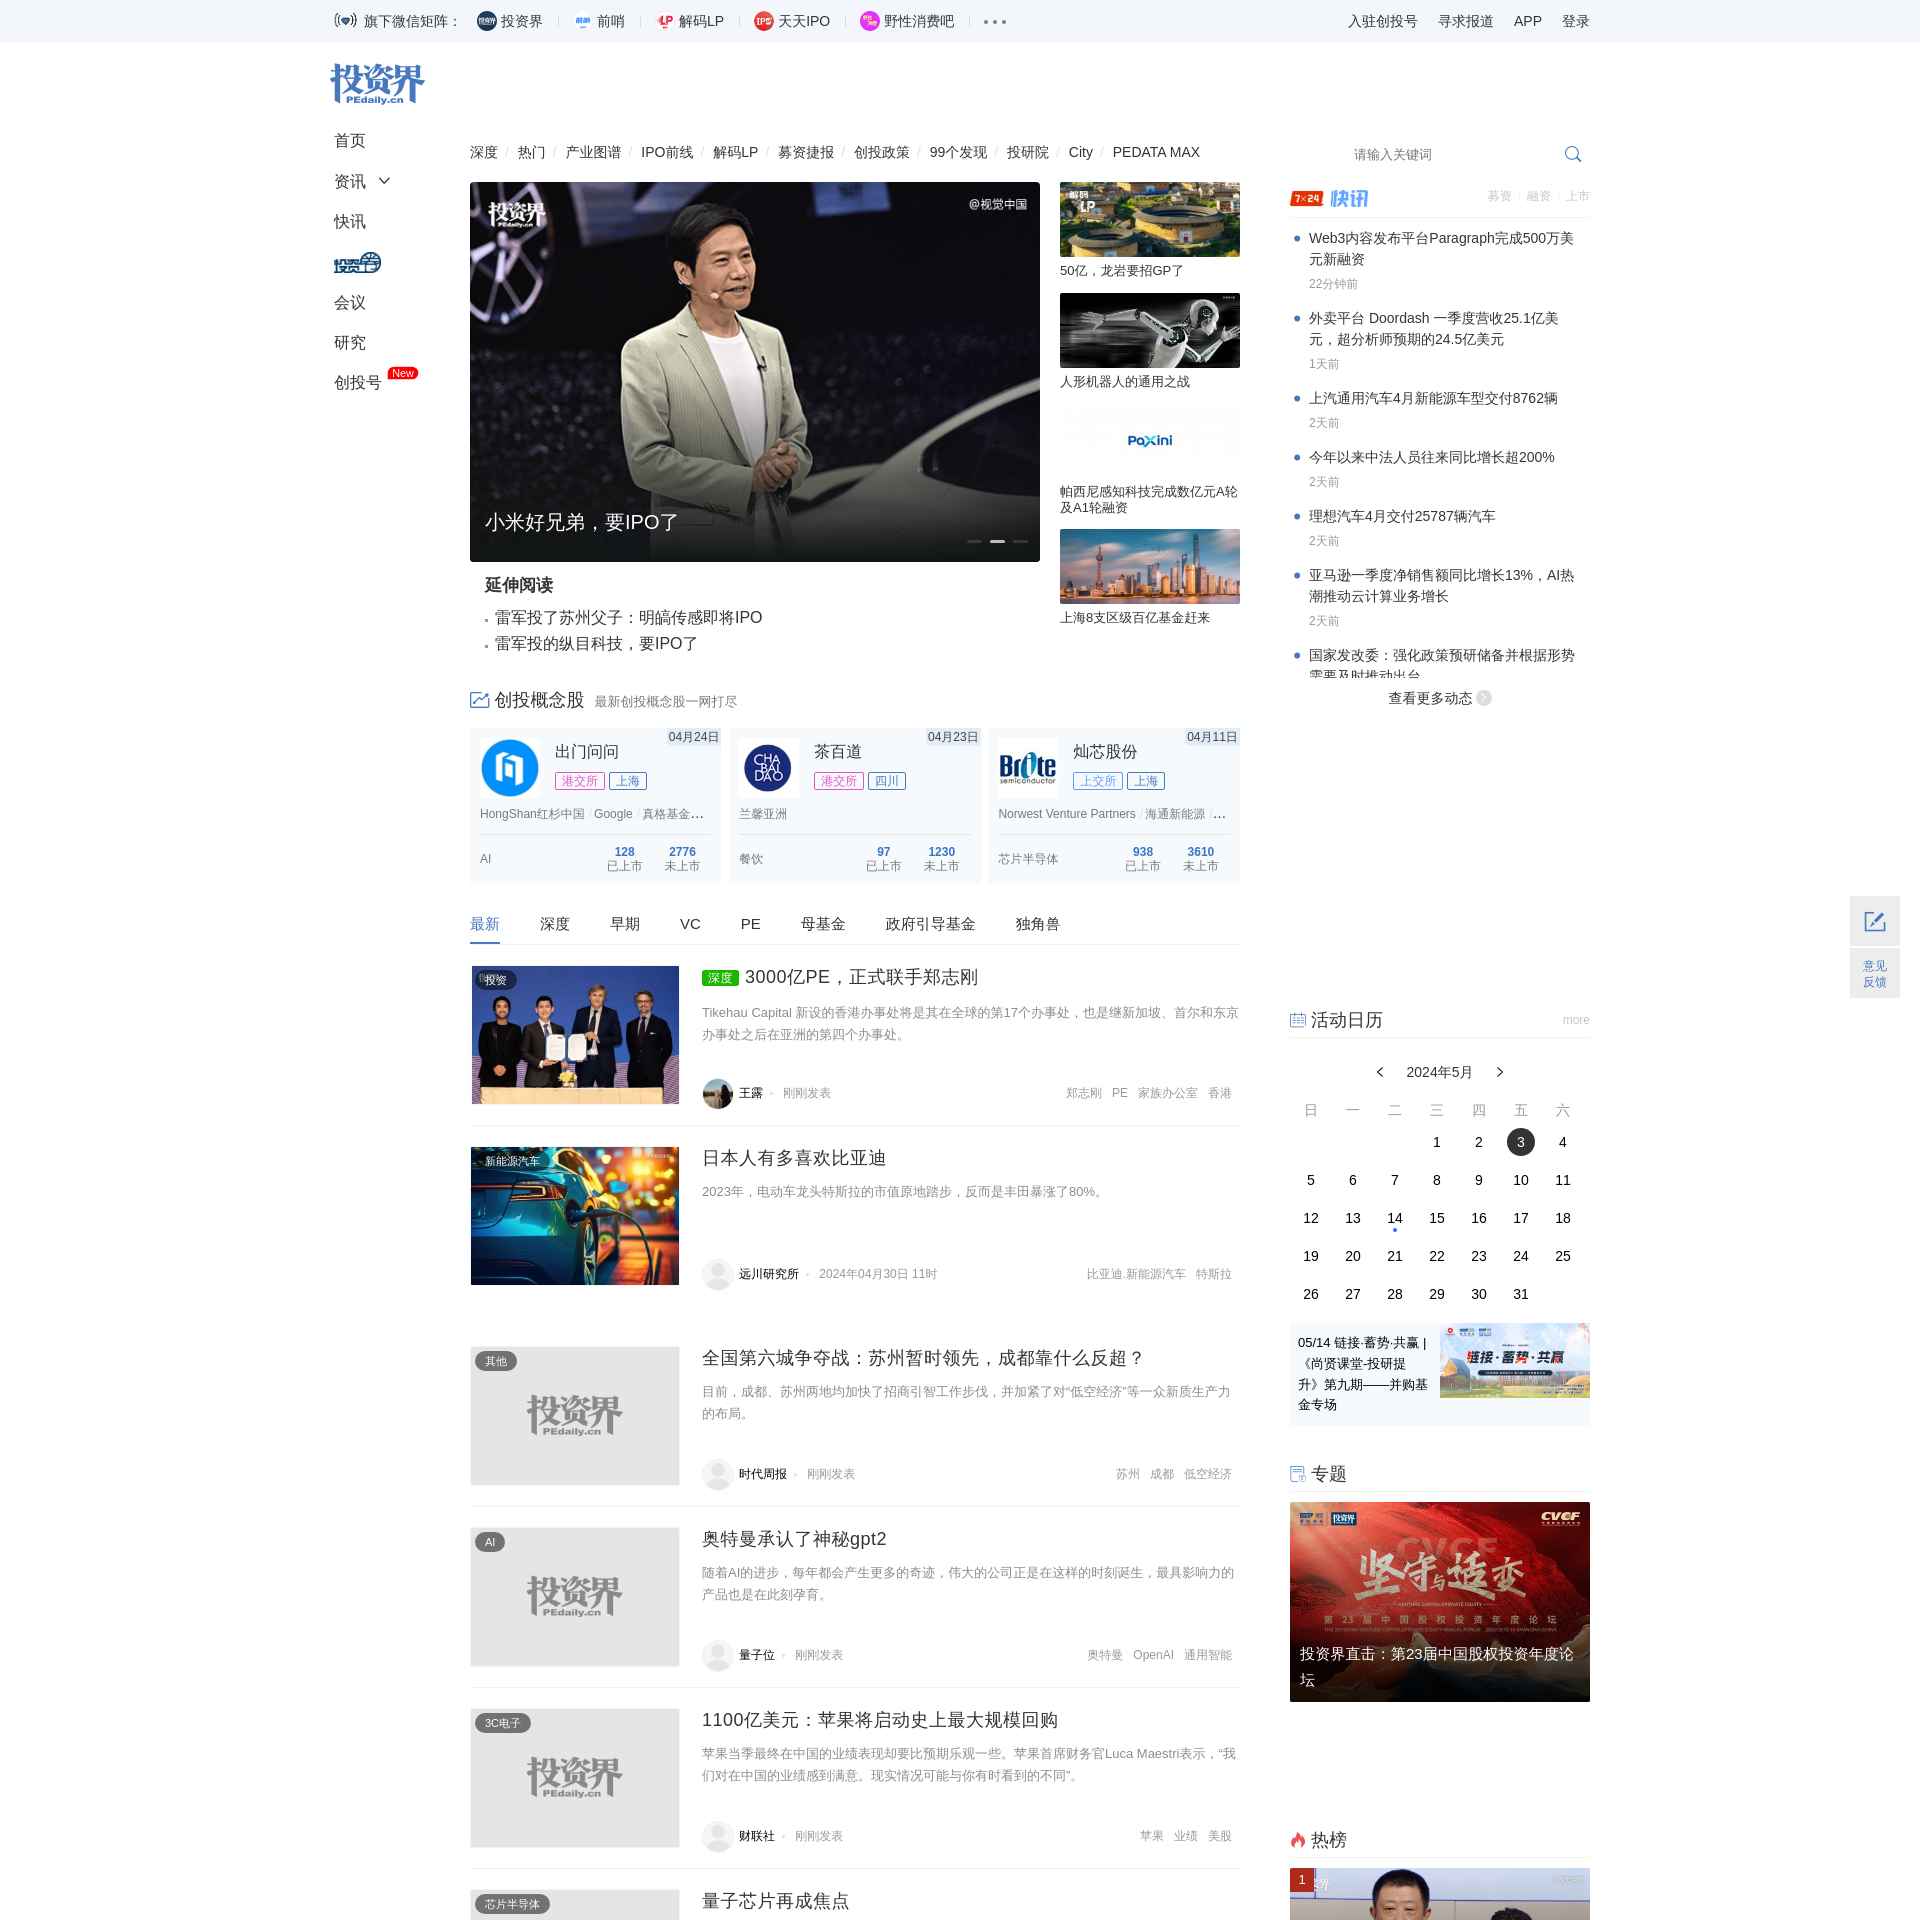 PE Daily: A Leading Chinese Financial News Website